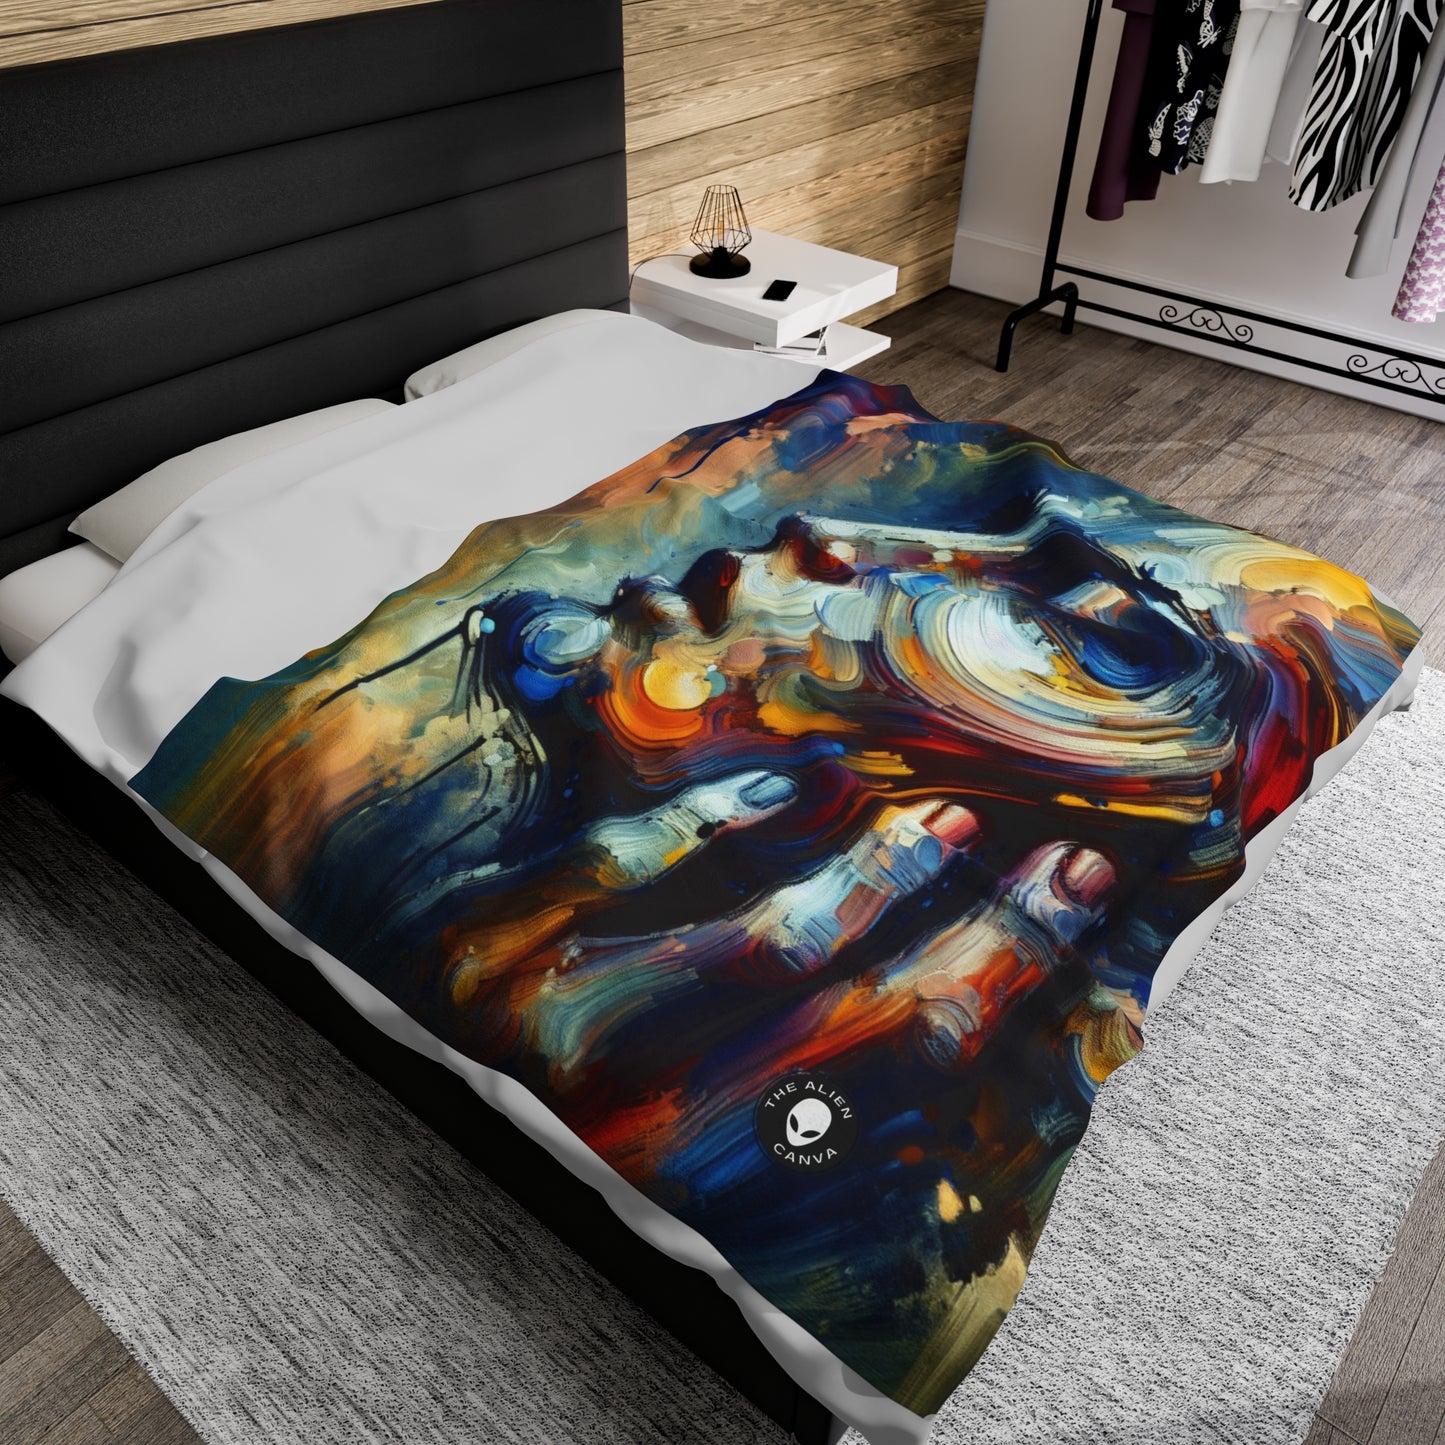 "City Lights: A Neo-Expressionist Ode to Urban Chaos" - The Alien Velveteen Plush Blanket Neo-Expressionism